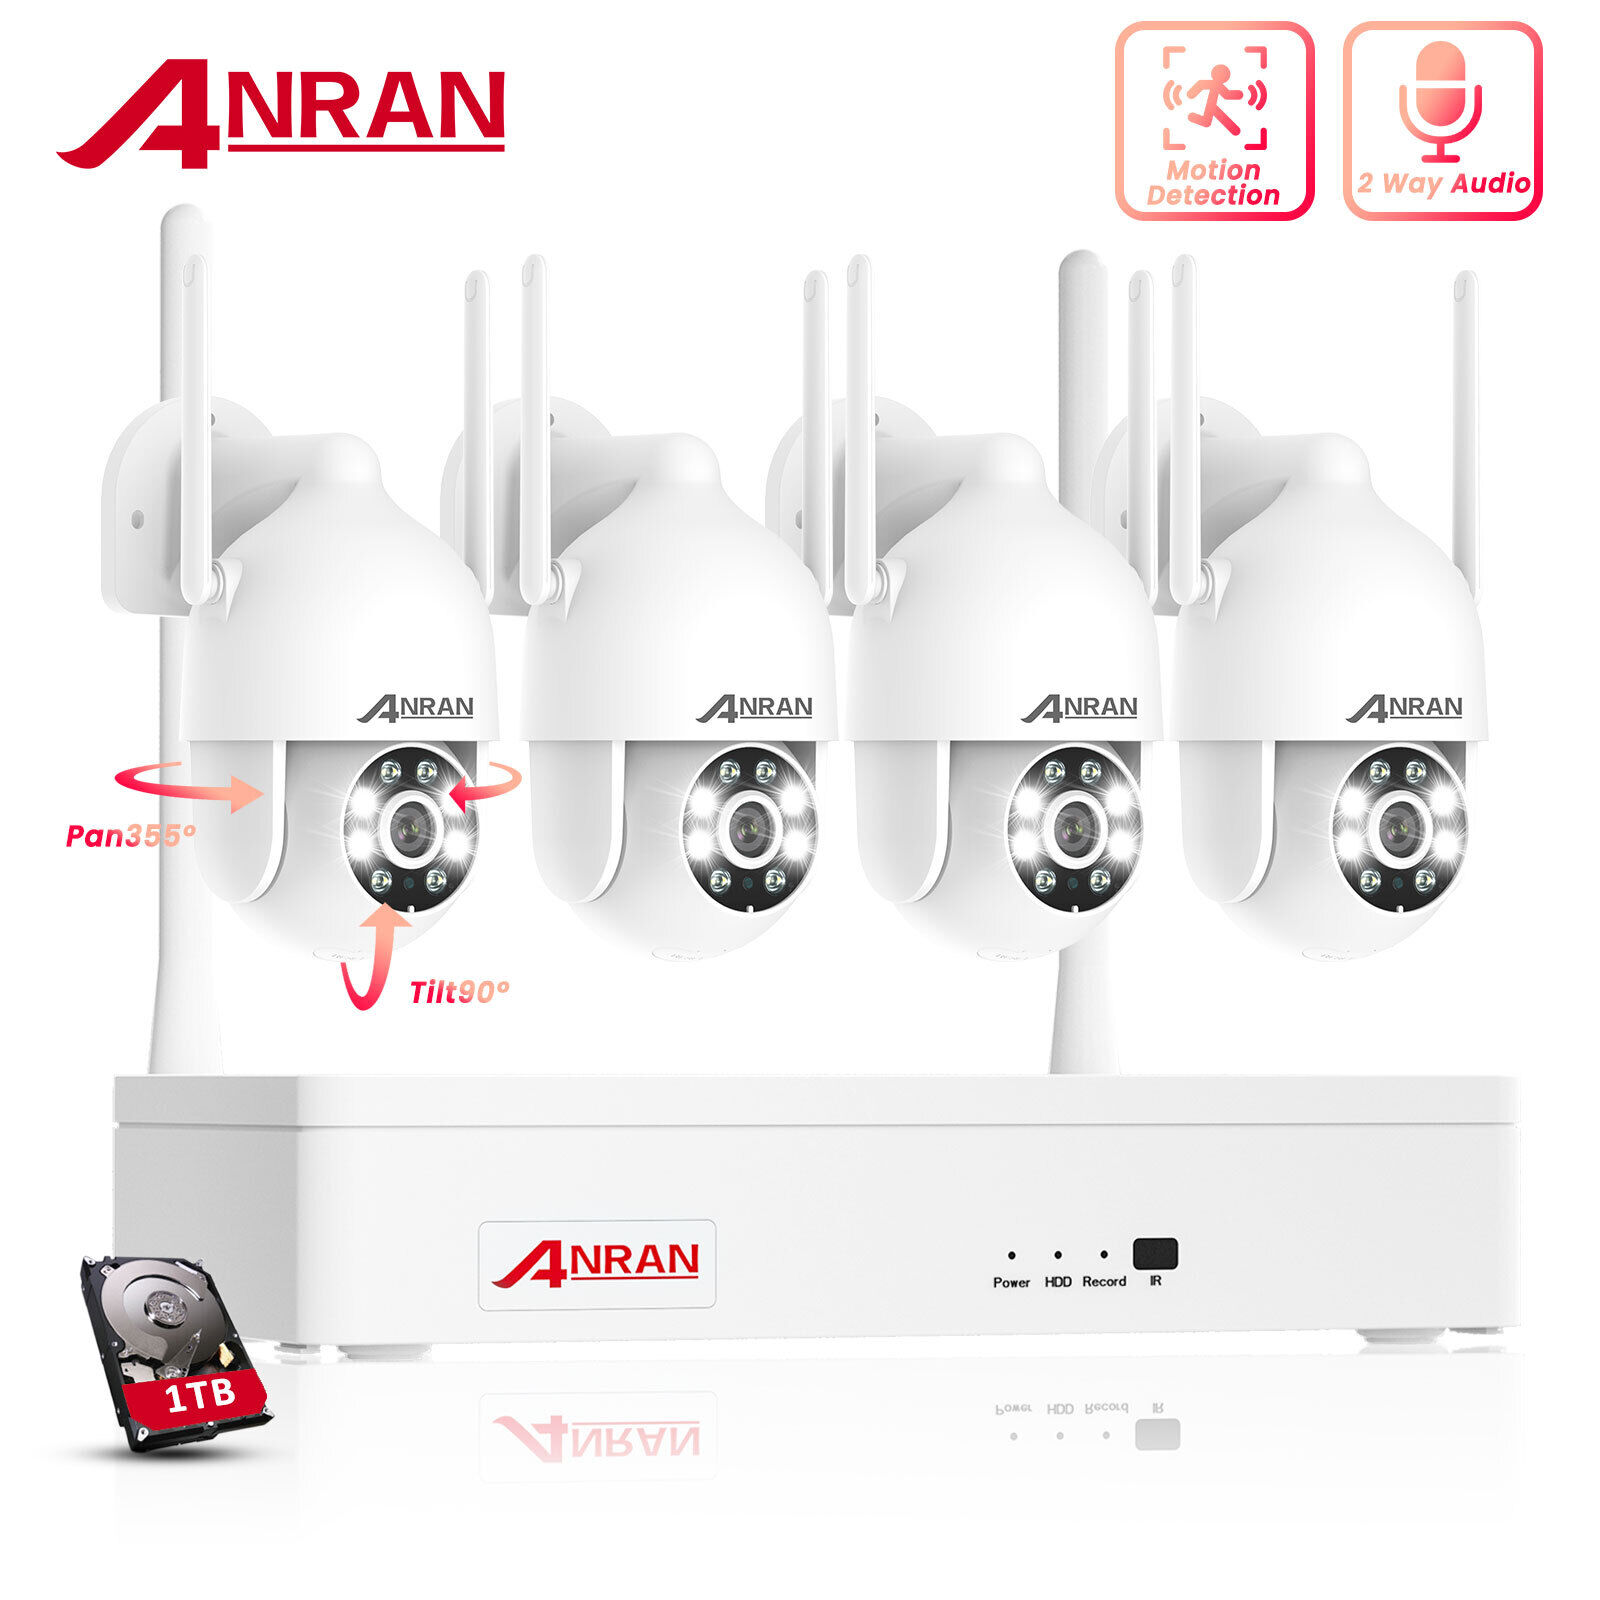 ANRAN 1296P 8CH Wireless Security Camera System Outdoor WiFi CCTV Audi